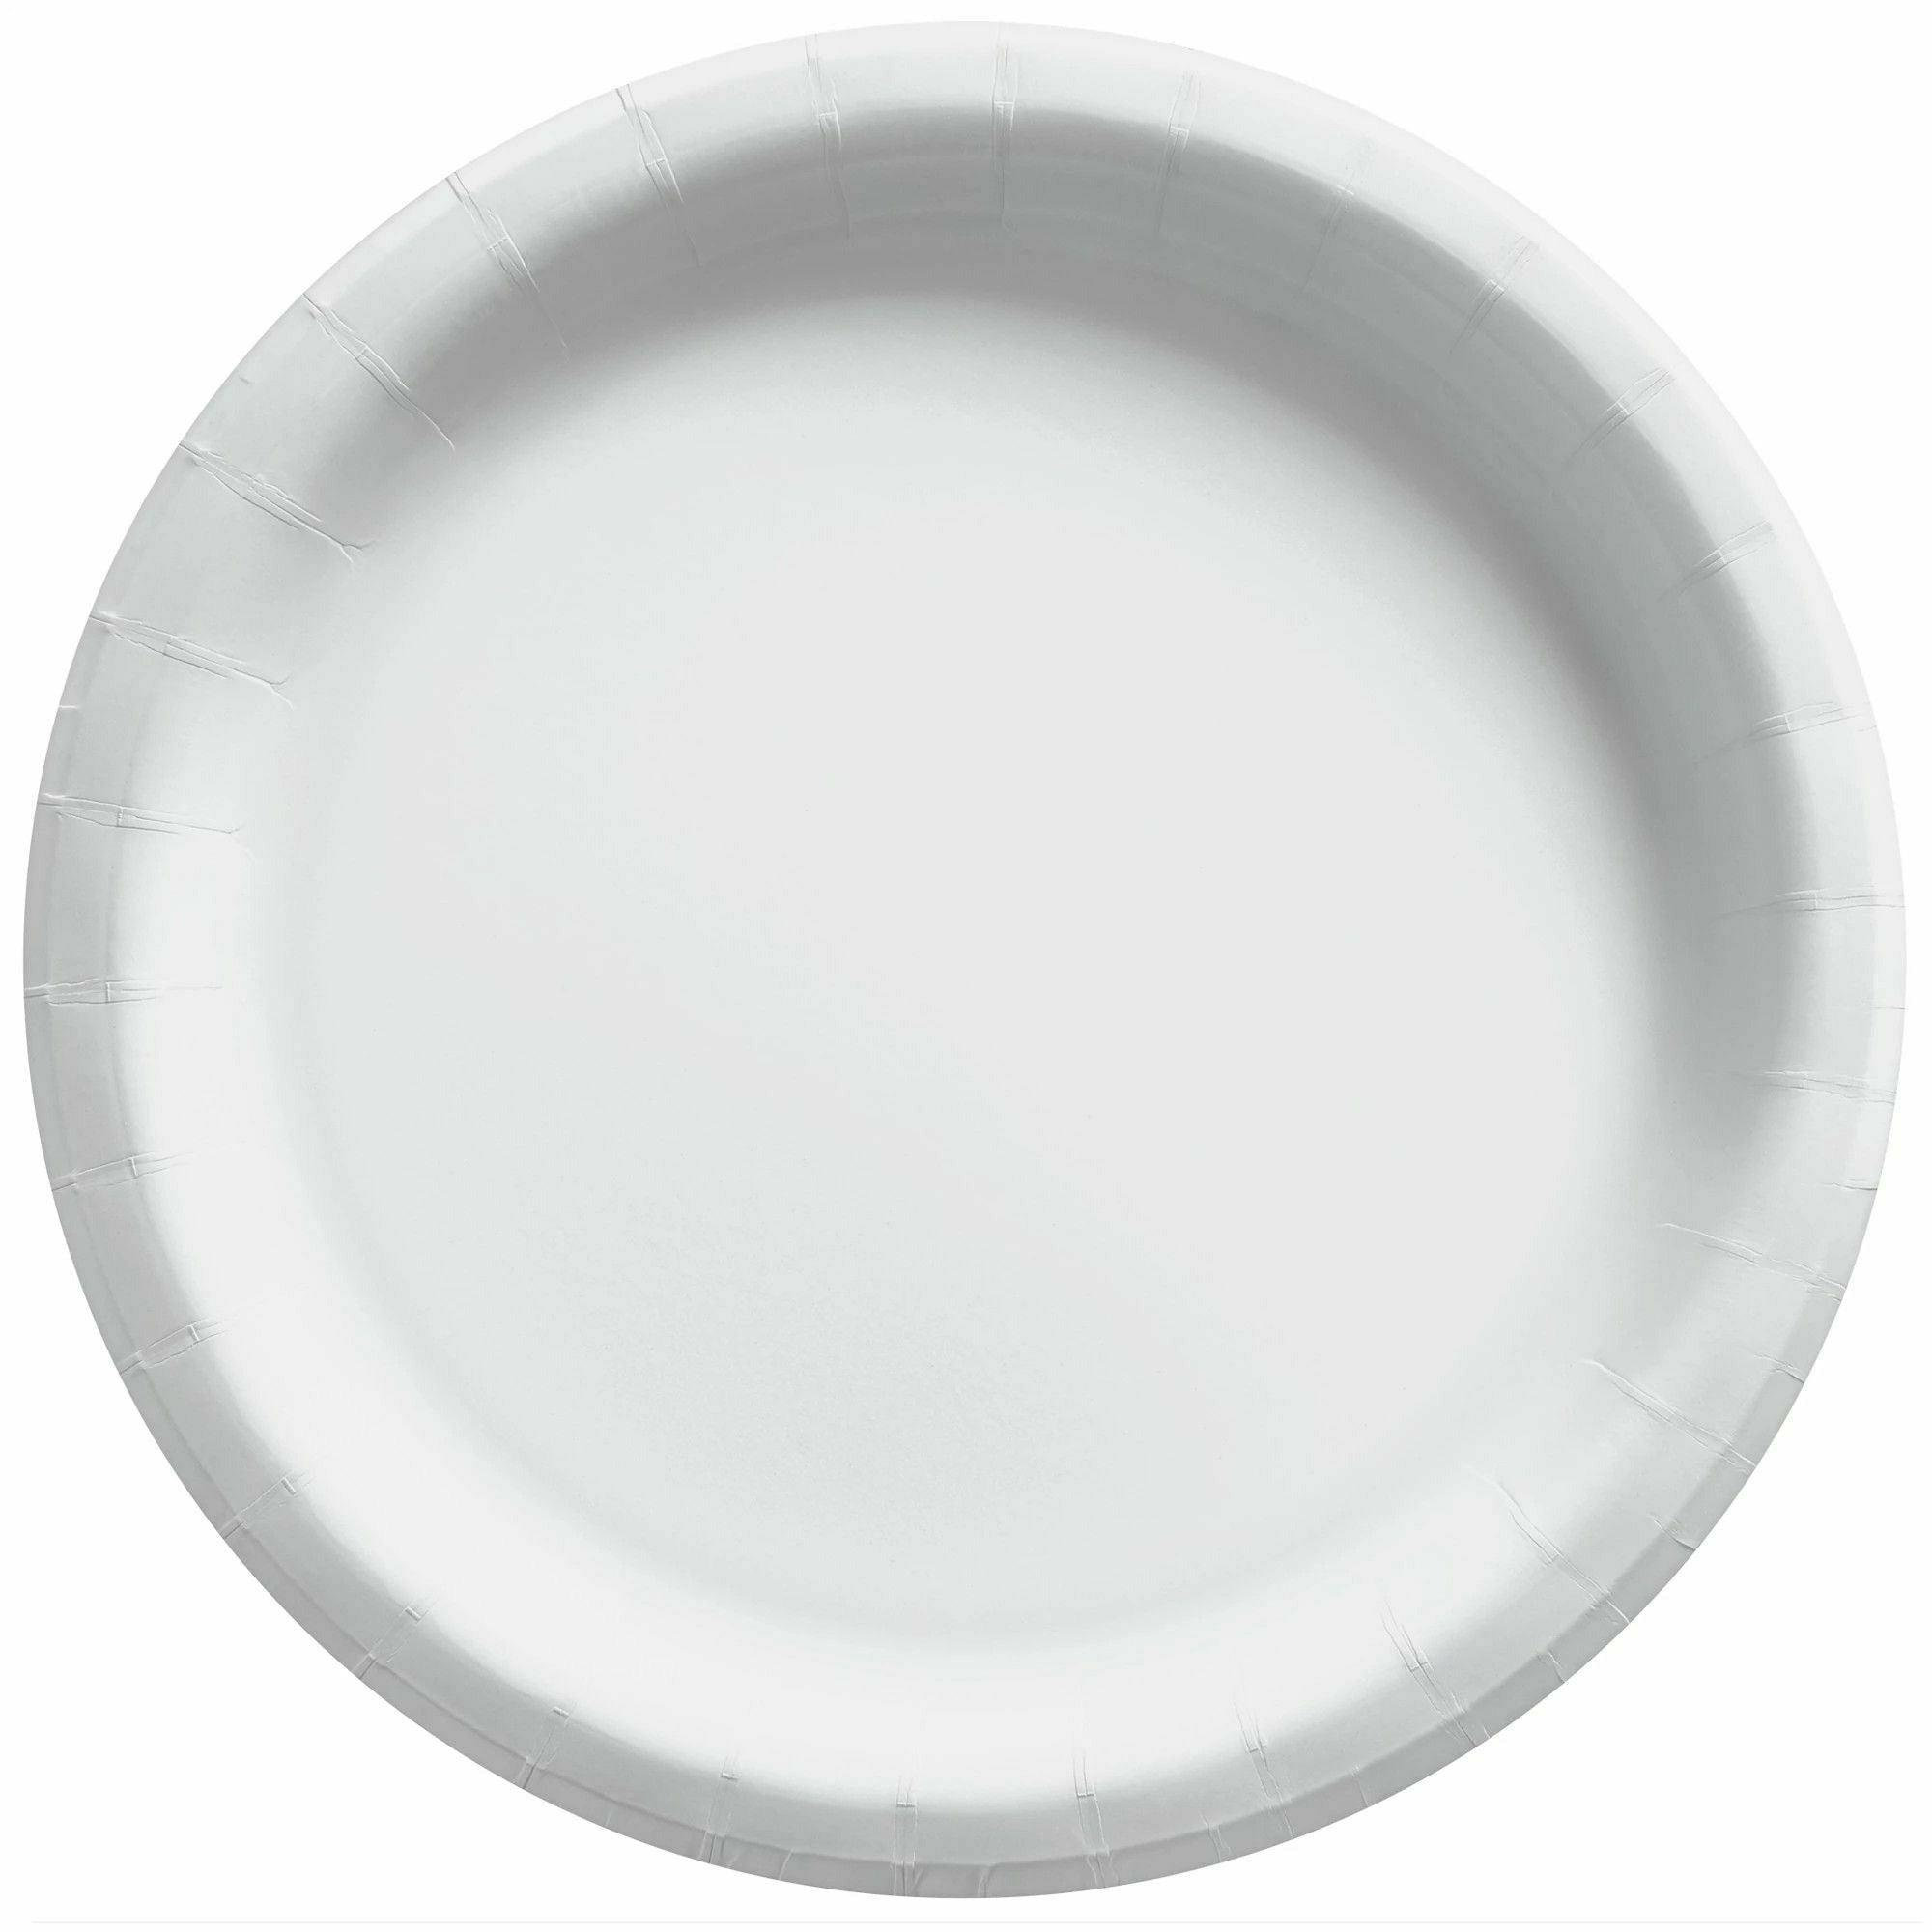 Amscan BASIC Frosty White - 8 1/2" Round Paper Plates, 50 Ct.